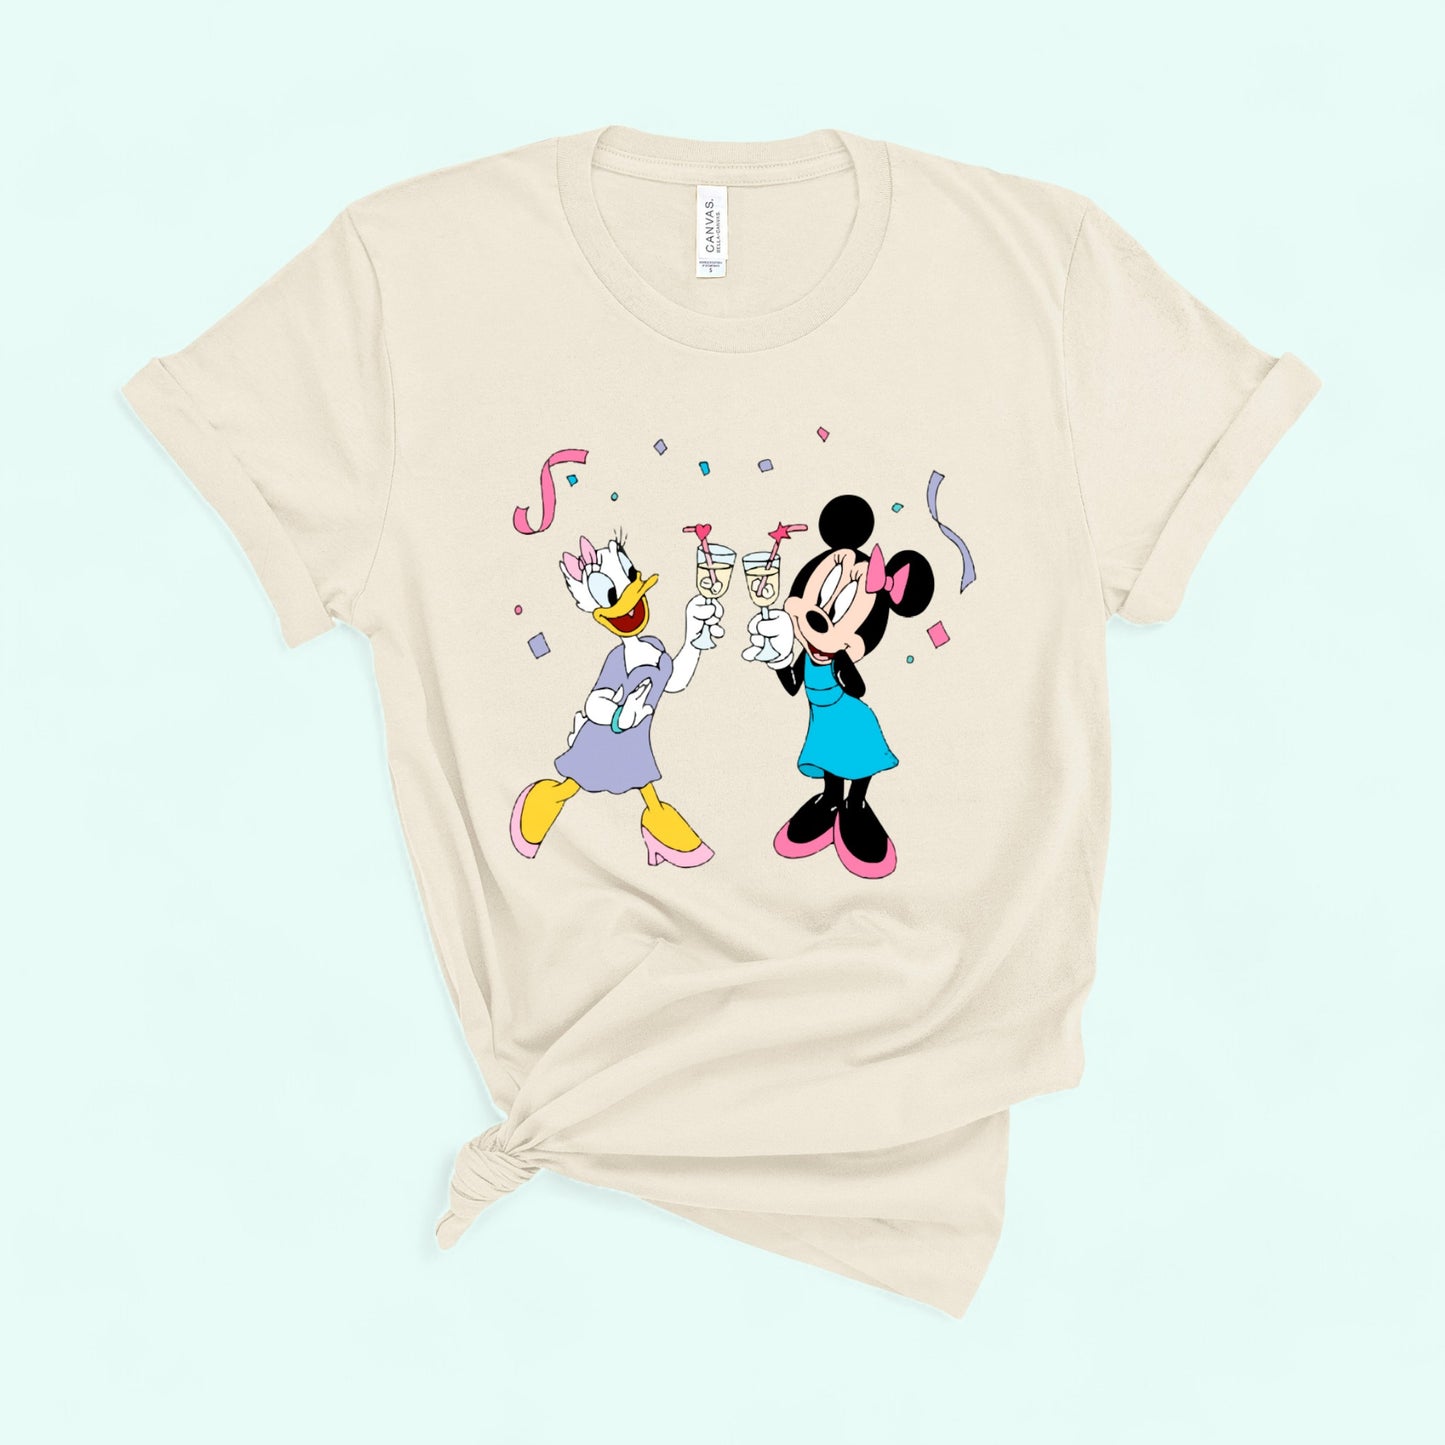 Minnie and Daisy Shirt Natural color